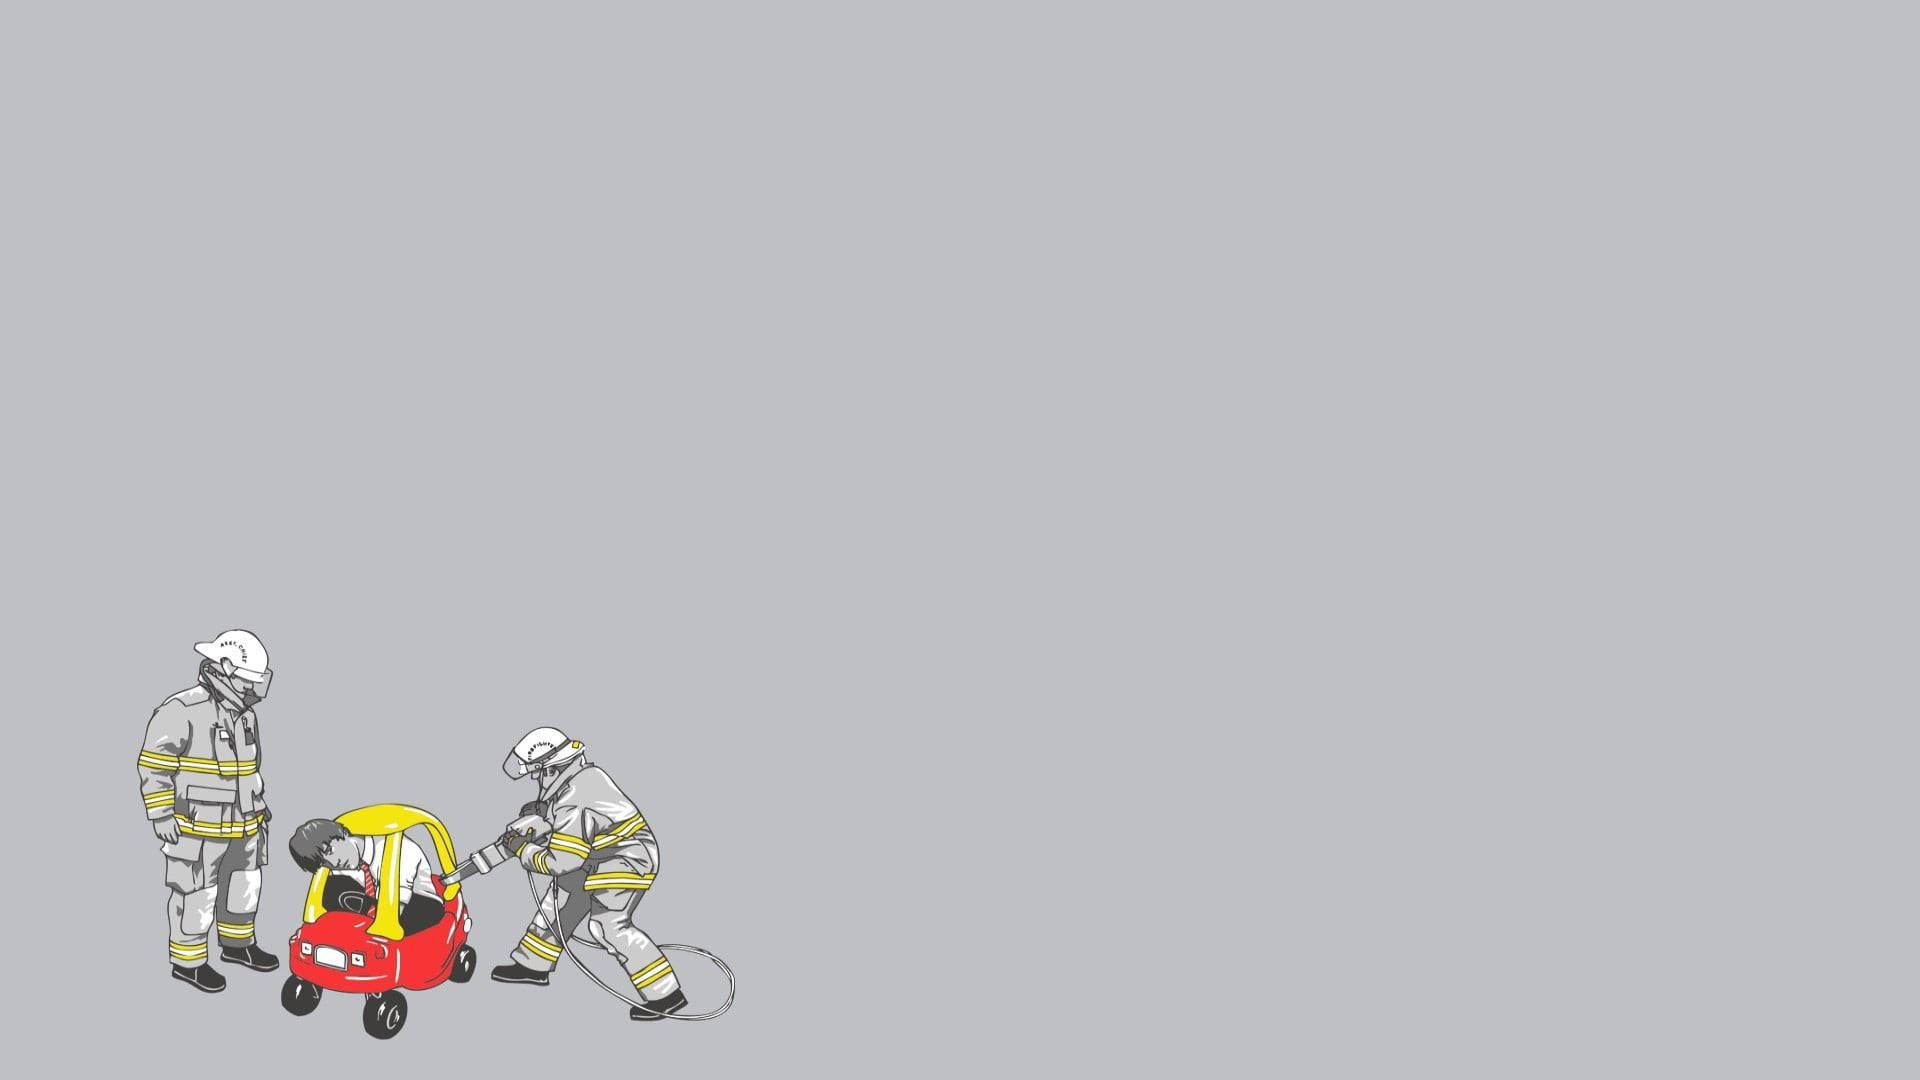 Two Illustrated Firefighters In Action Wallpaper